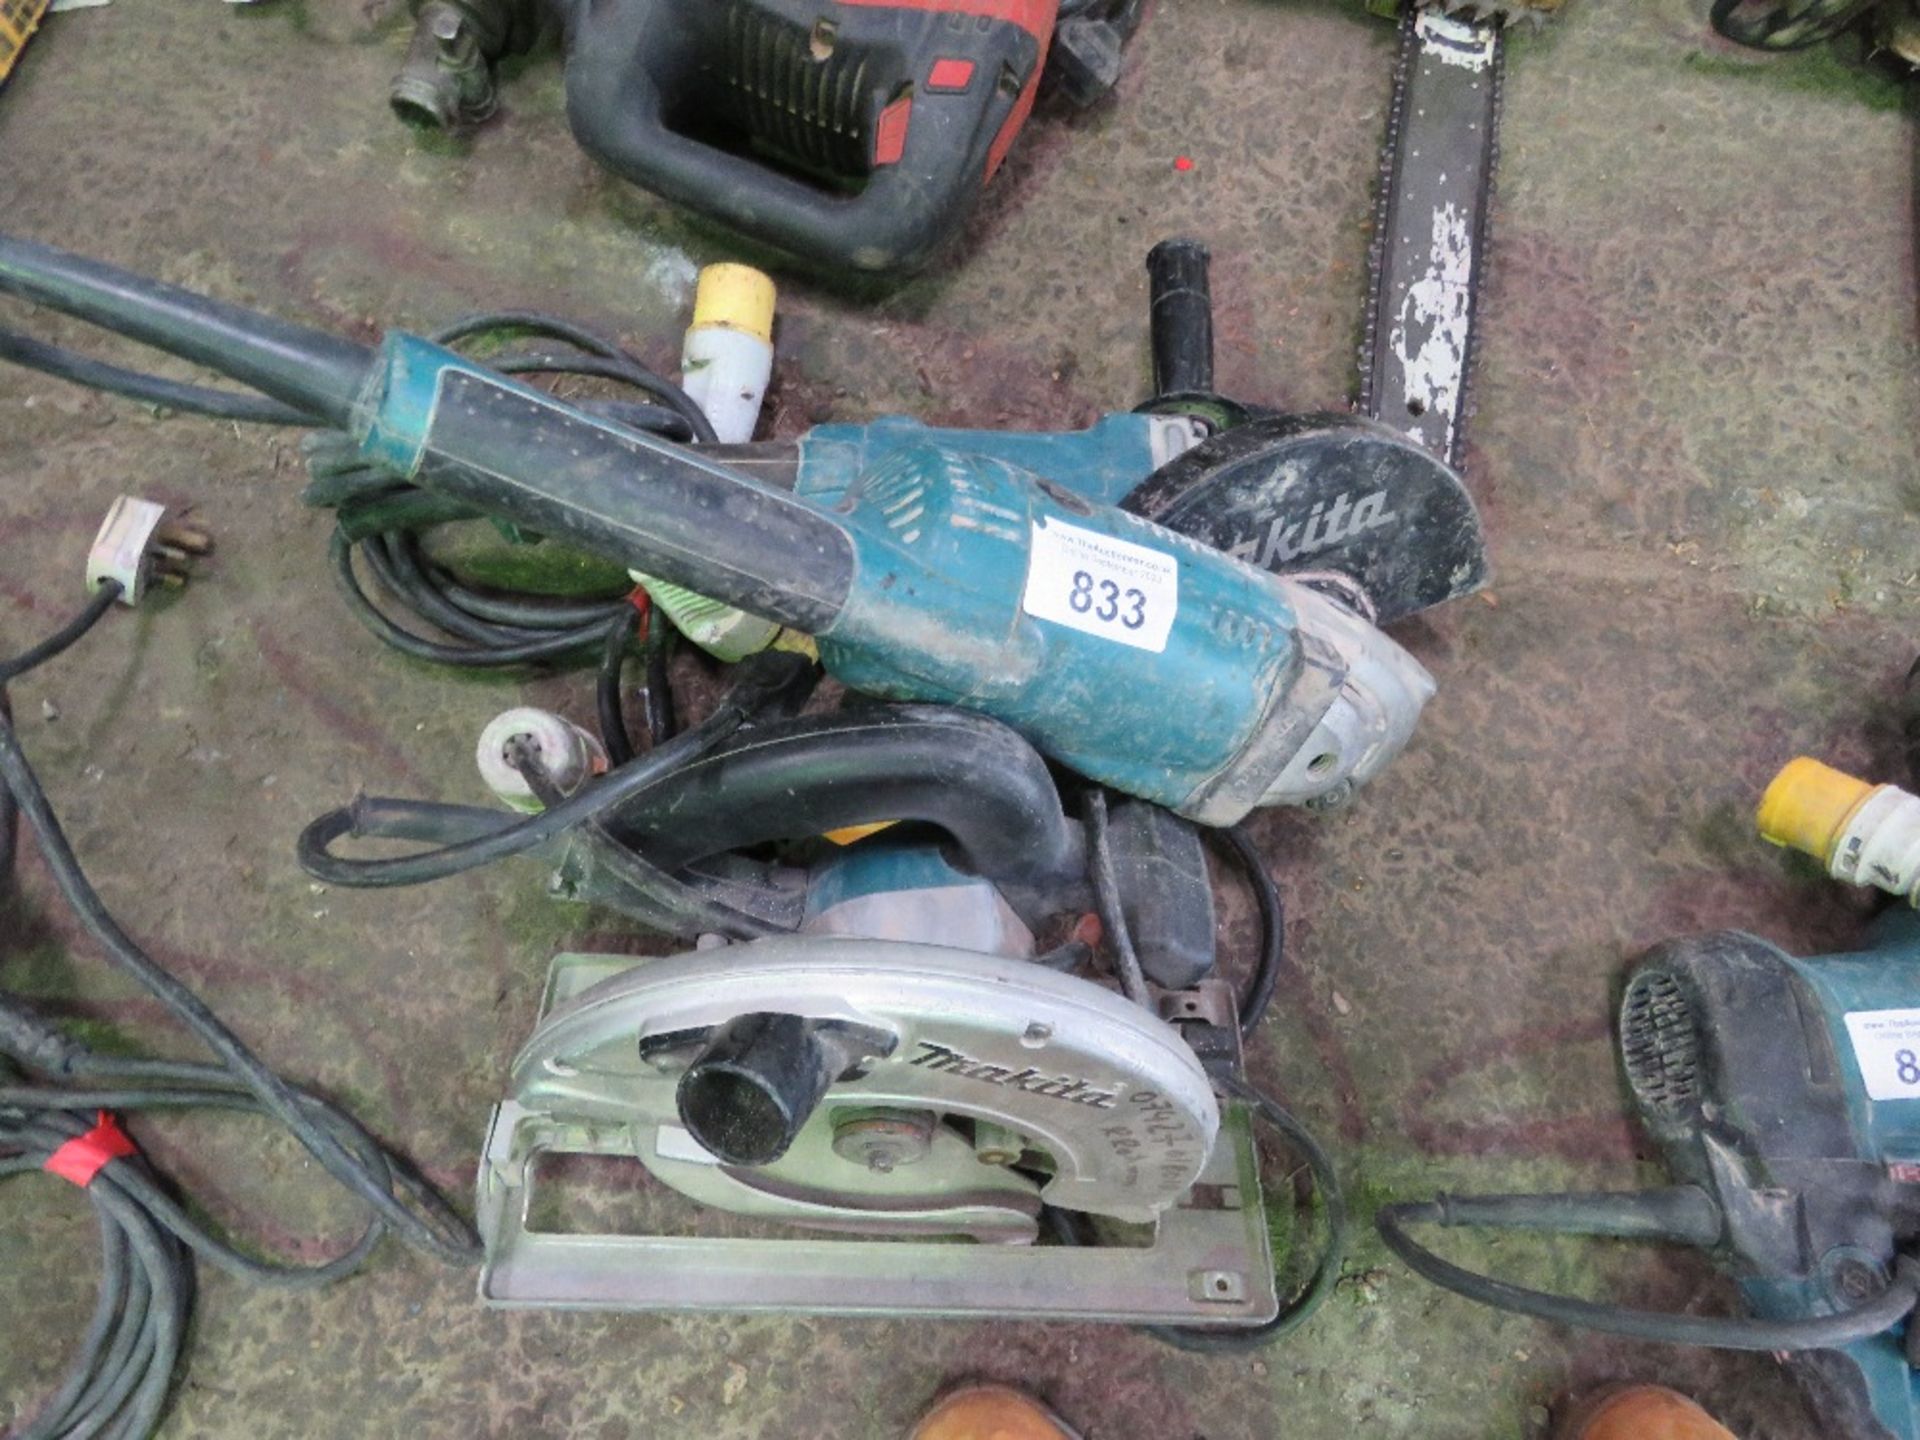 3 X POWER TOOLS: 2 X ANGLE GRINDERS PLUS A CIRCULAR SAW, 110VOLT. THIS LOT IS SOLD UNDER THE AUCT